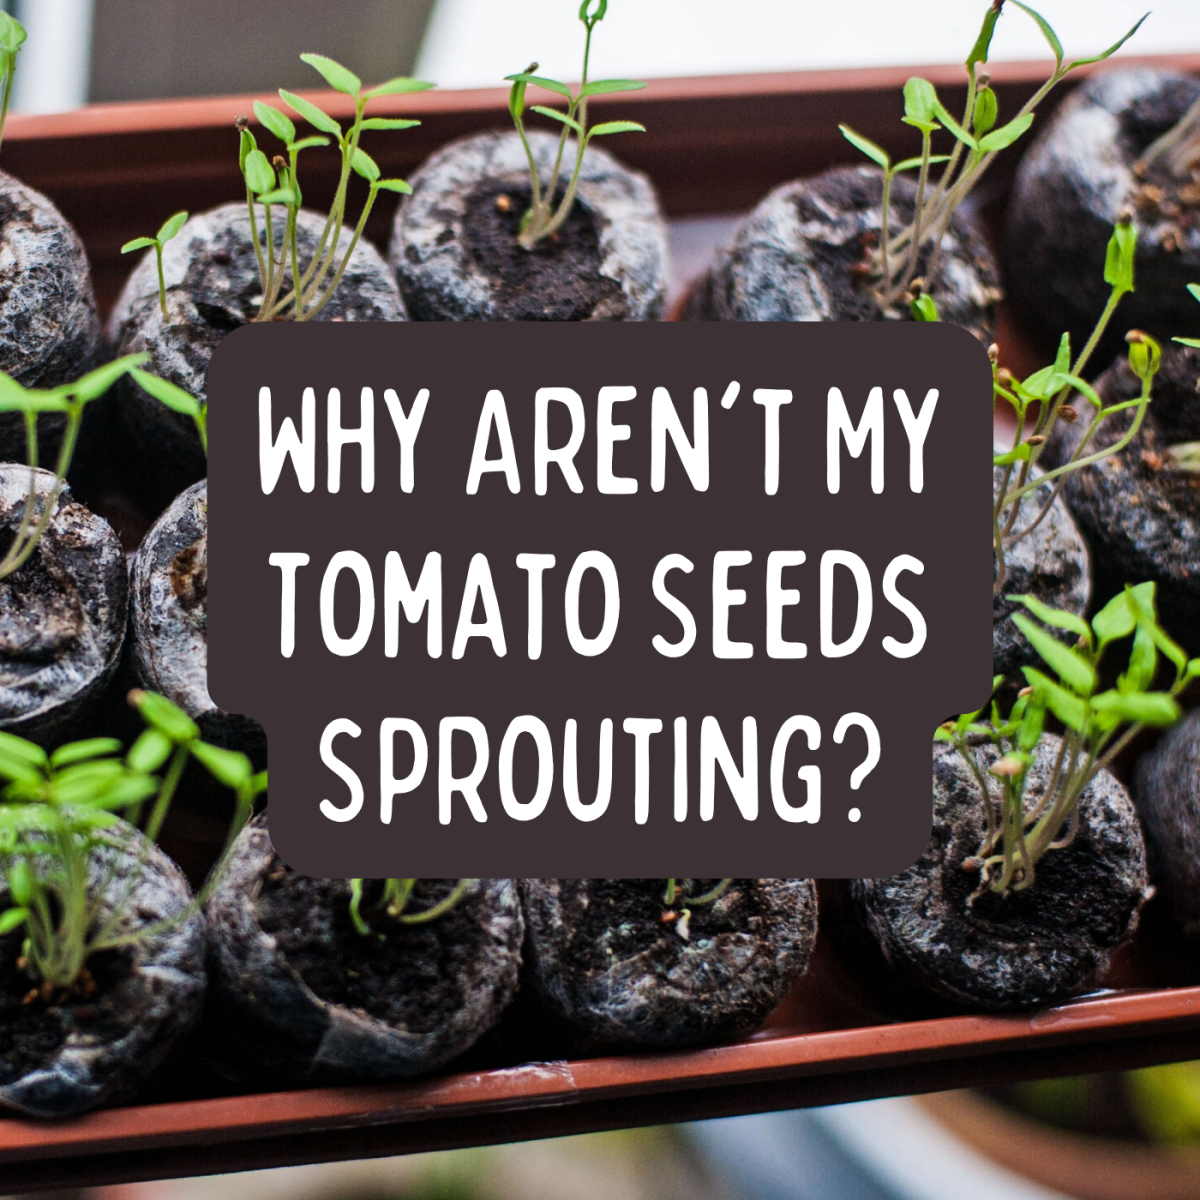 Why Are Your Tomato Seeds Not Germinating?